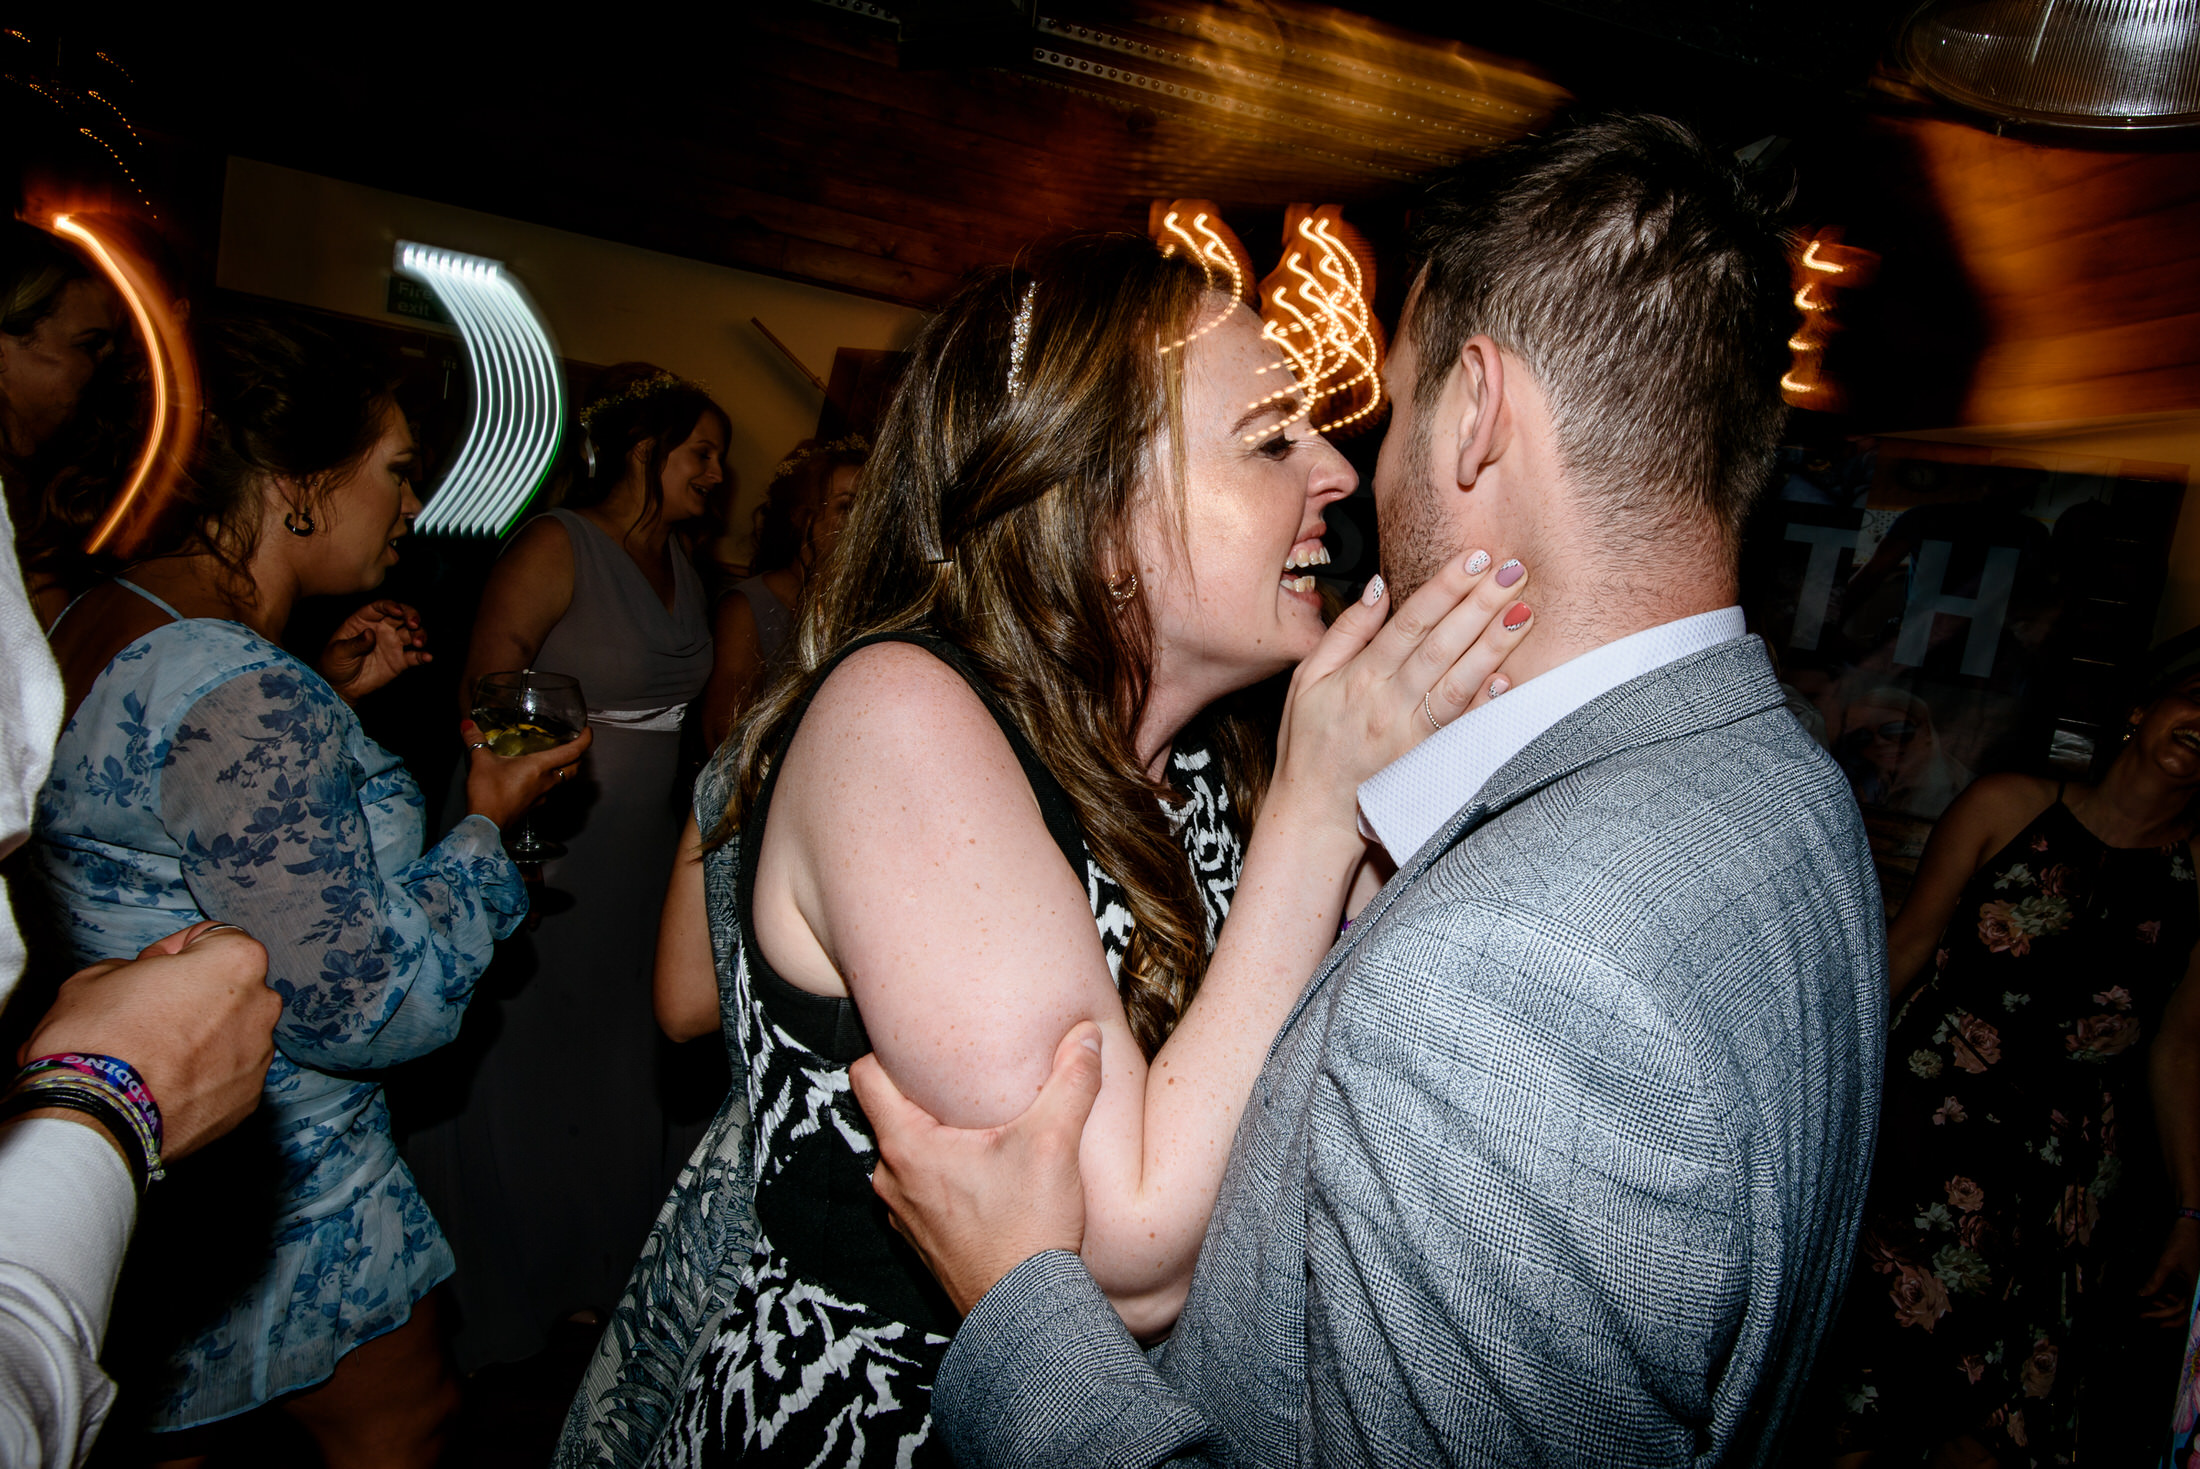 A couple embracing and sharing a passionate kiss on the dance floor at a wedding party.